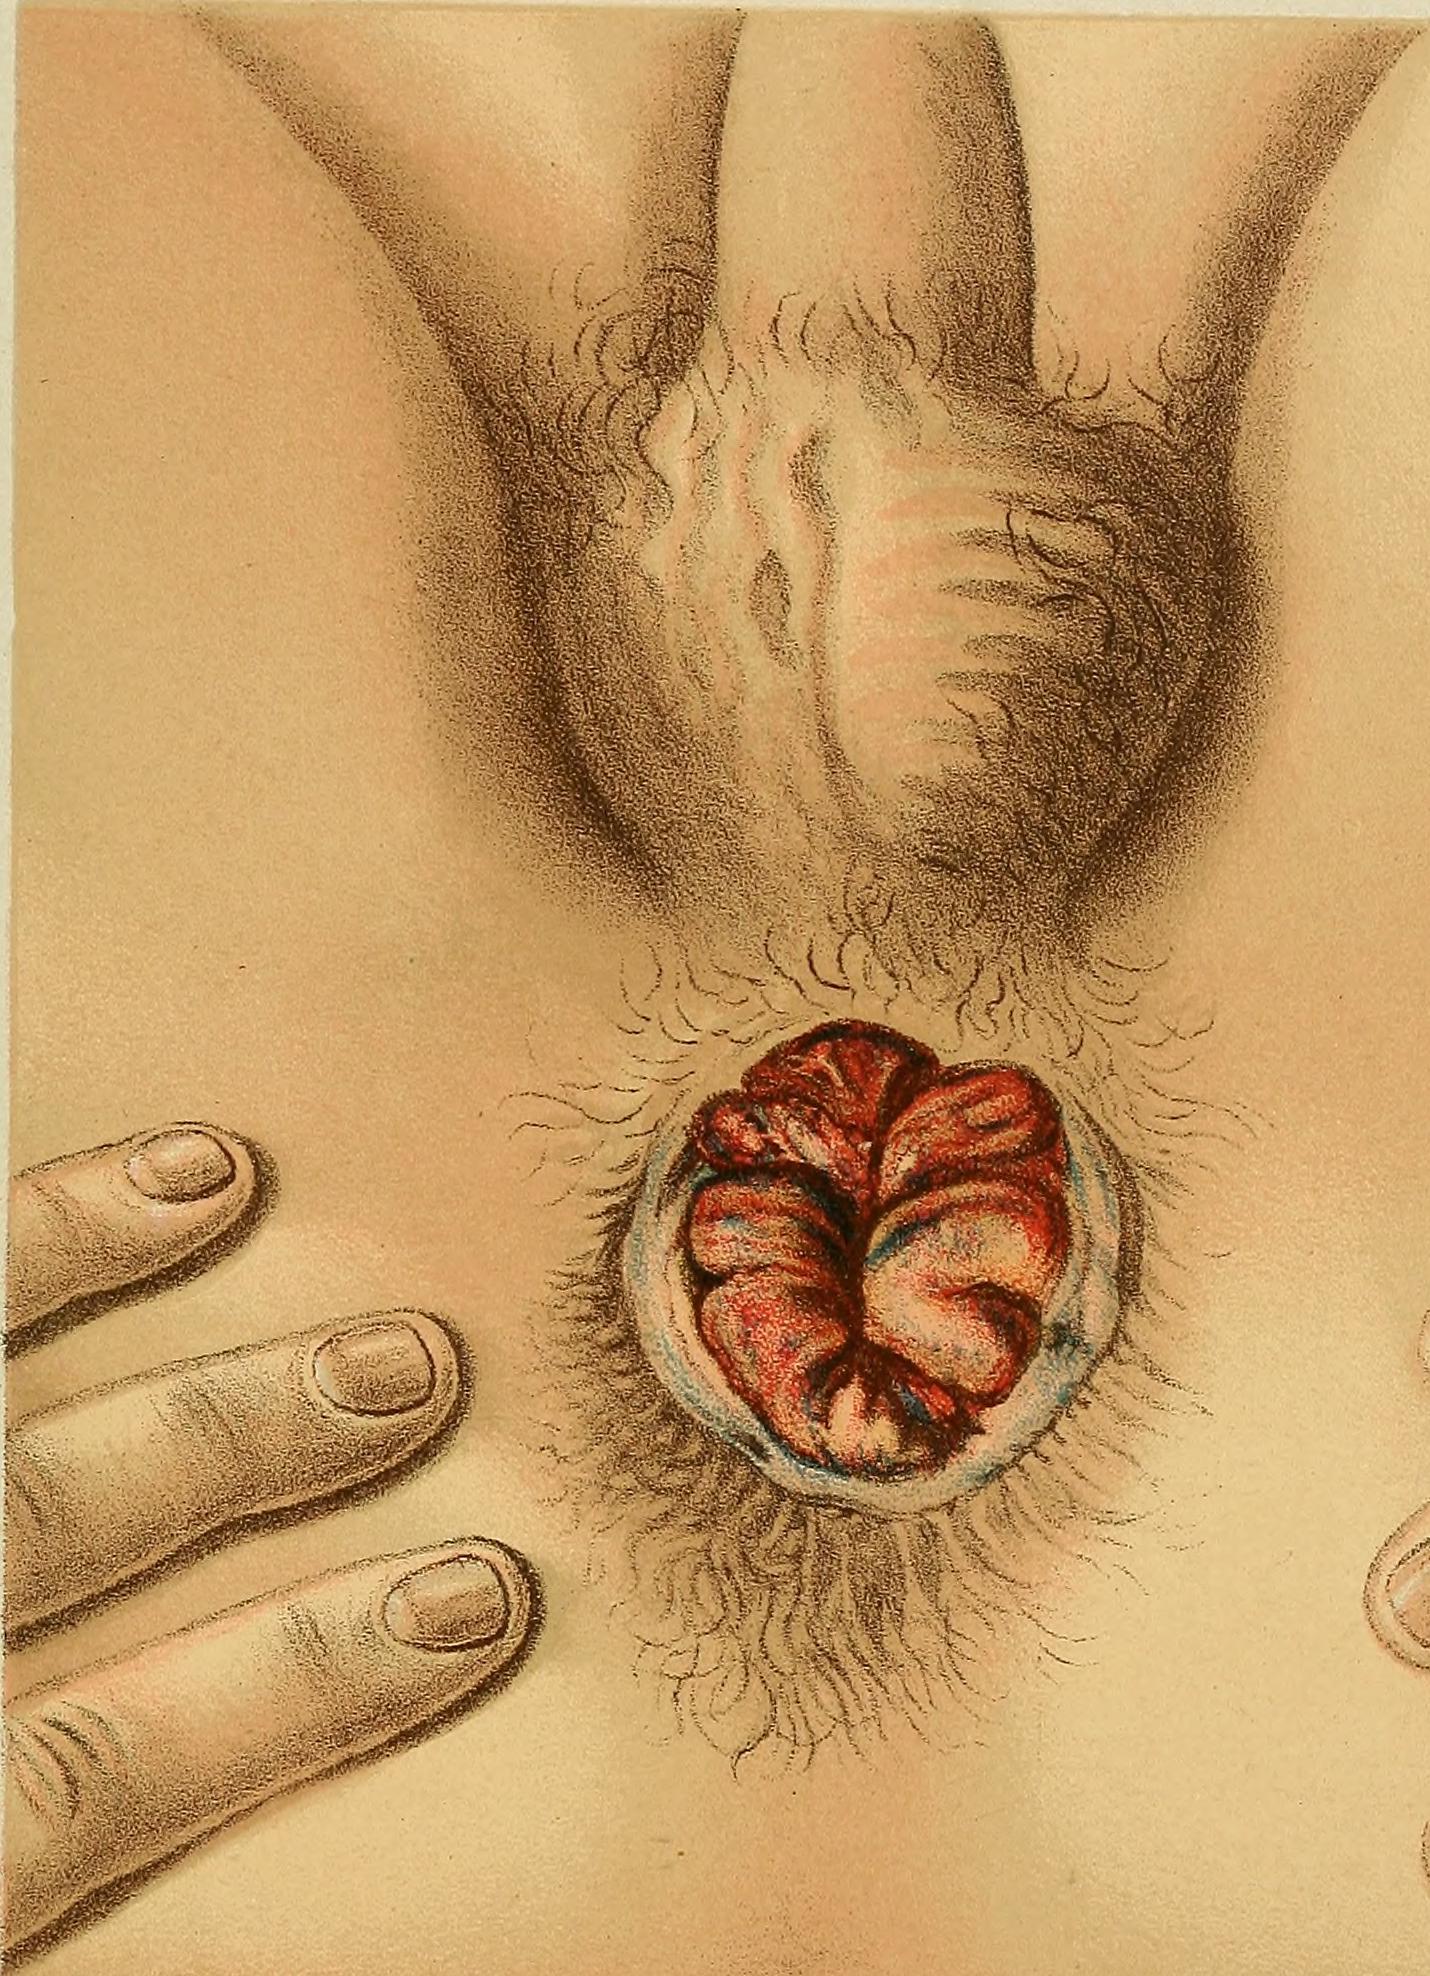 File:Hemorrhoids - By Internet Archive Book Images - httpswww.flickr.comphotosinternetarchivebookimages14784684835Source book page httpsarchive.orgstreamdiseasesofrectum00gantdiseasesofrectum00gant-pagen490mode1up, No restrictions, ht.jpg